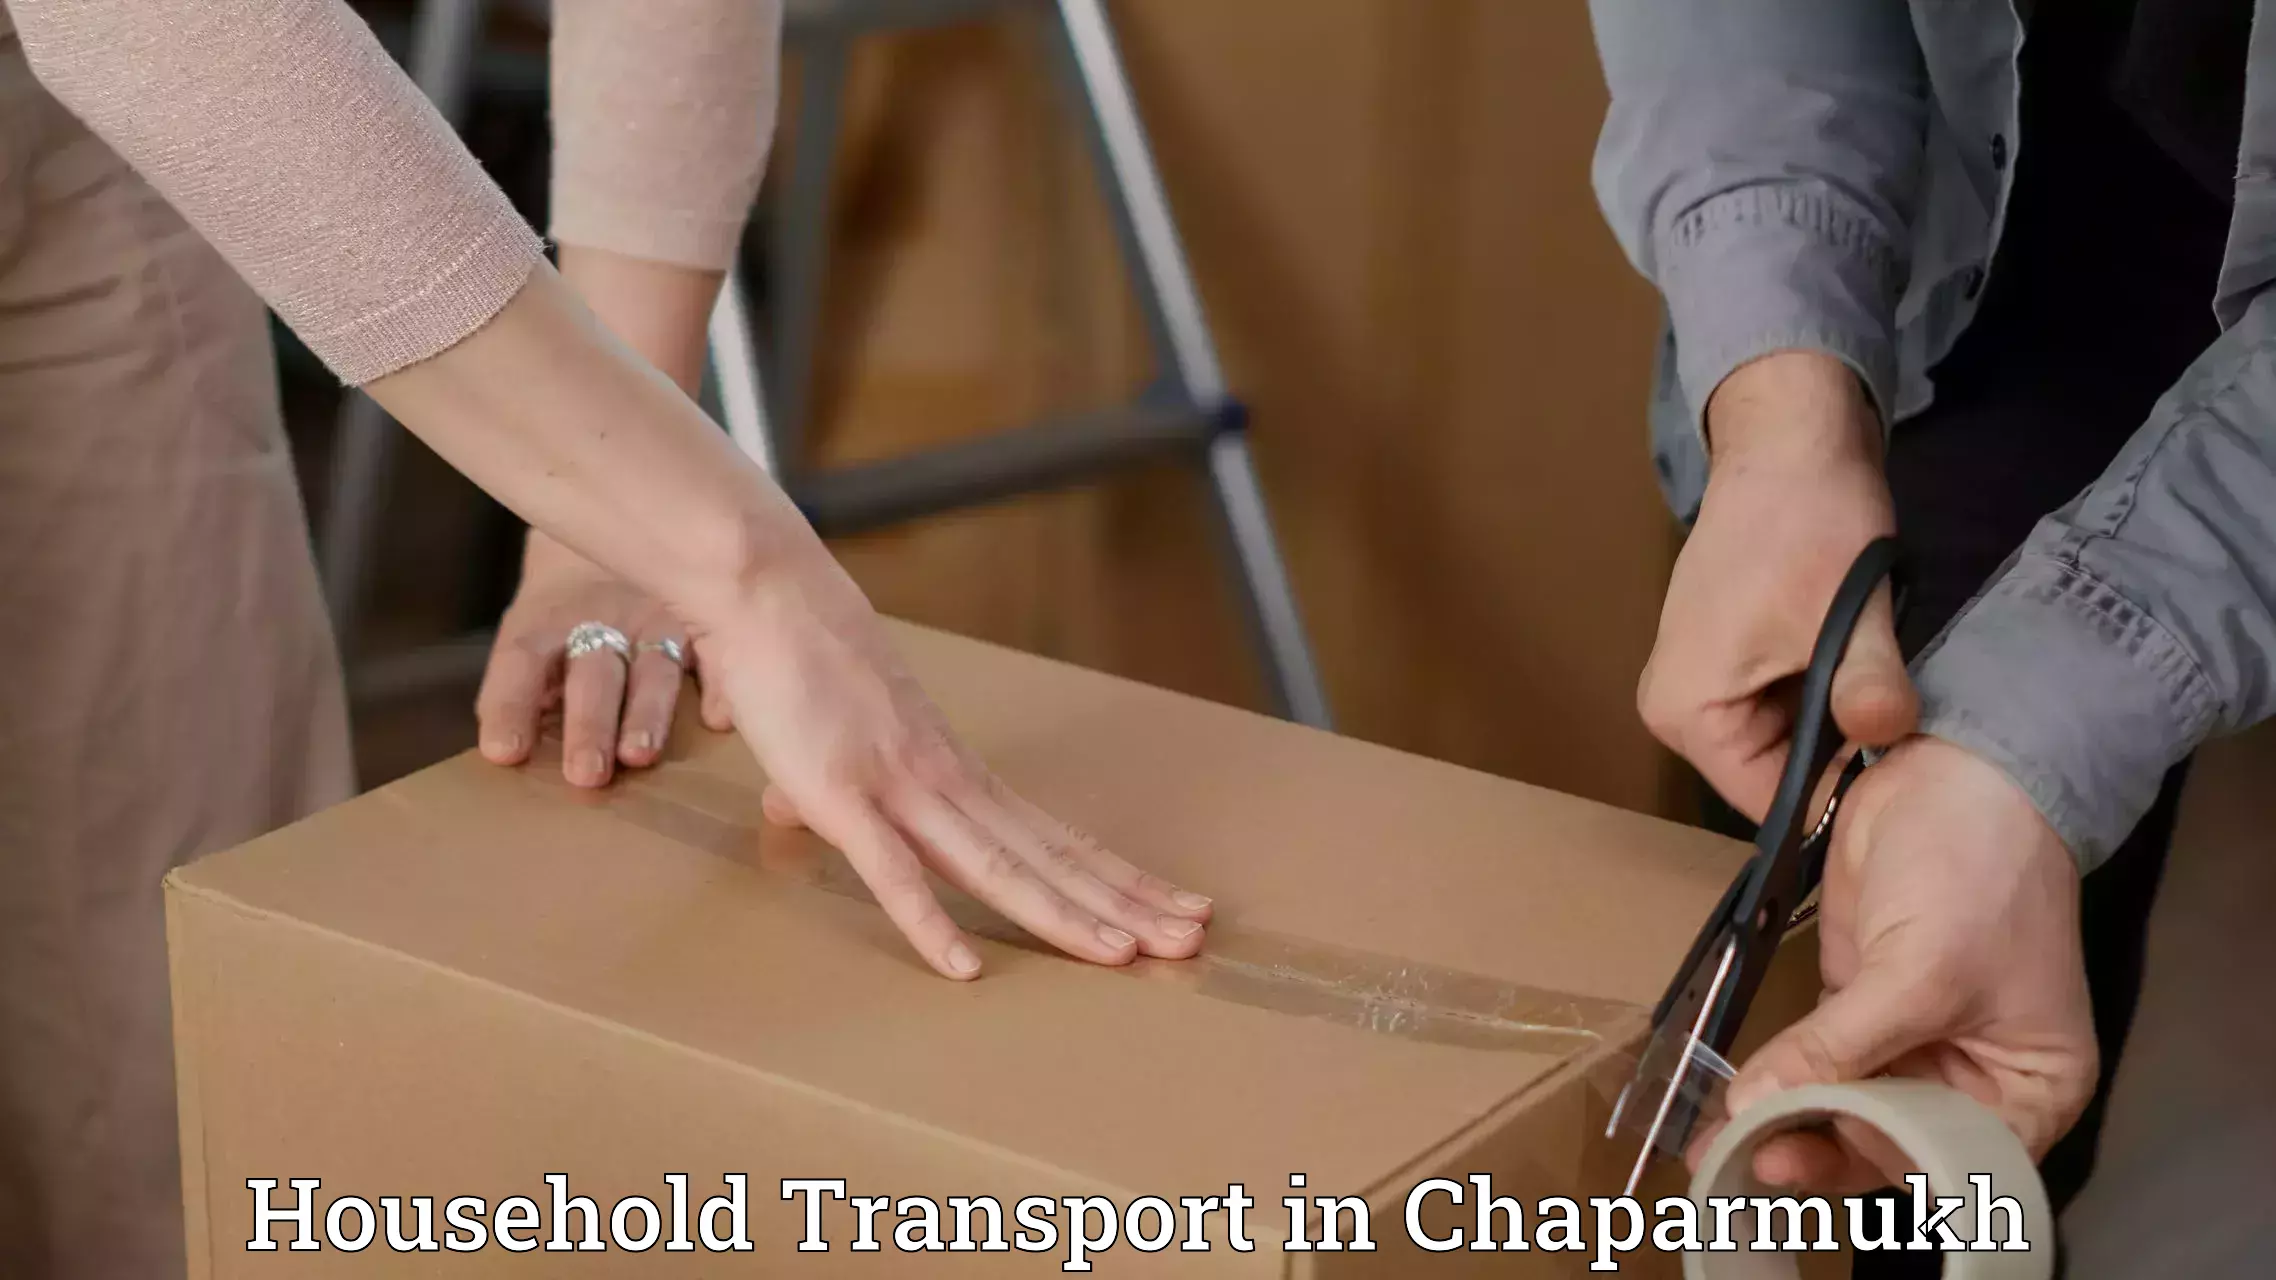 Furniture transport and storage in Chaparmukh